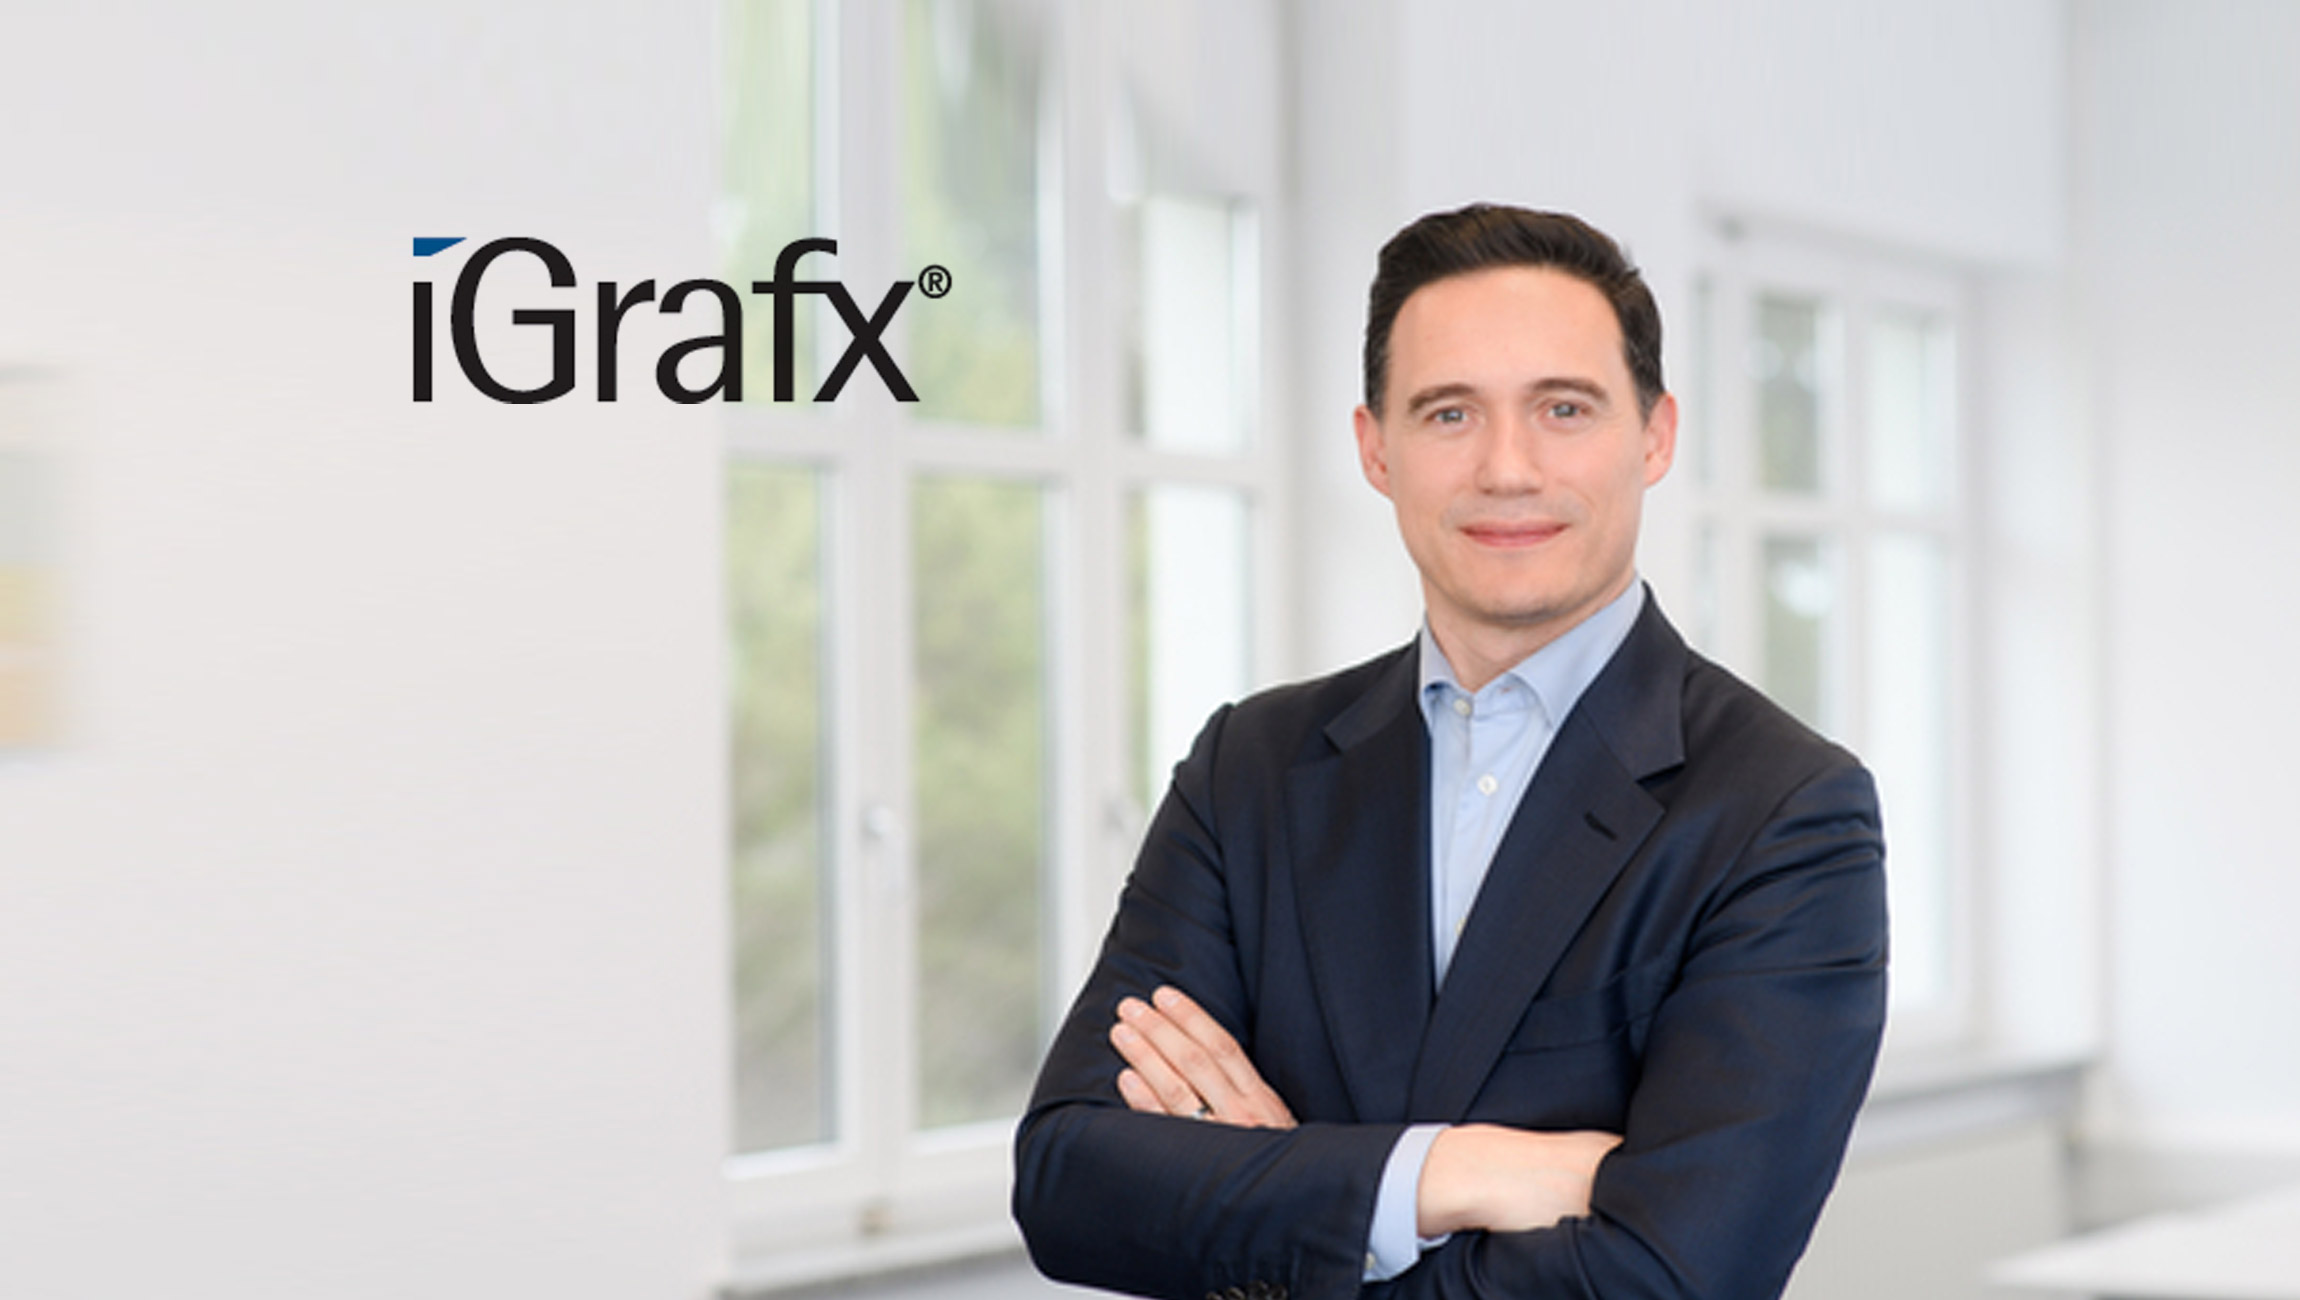 iGrafx Appoints Alexandre Wentzo as Chief Strategy Officer to Accelerate Growth and Innovation in the Business Process Management Market